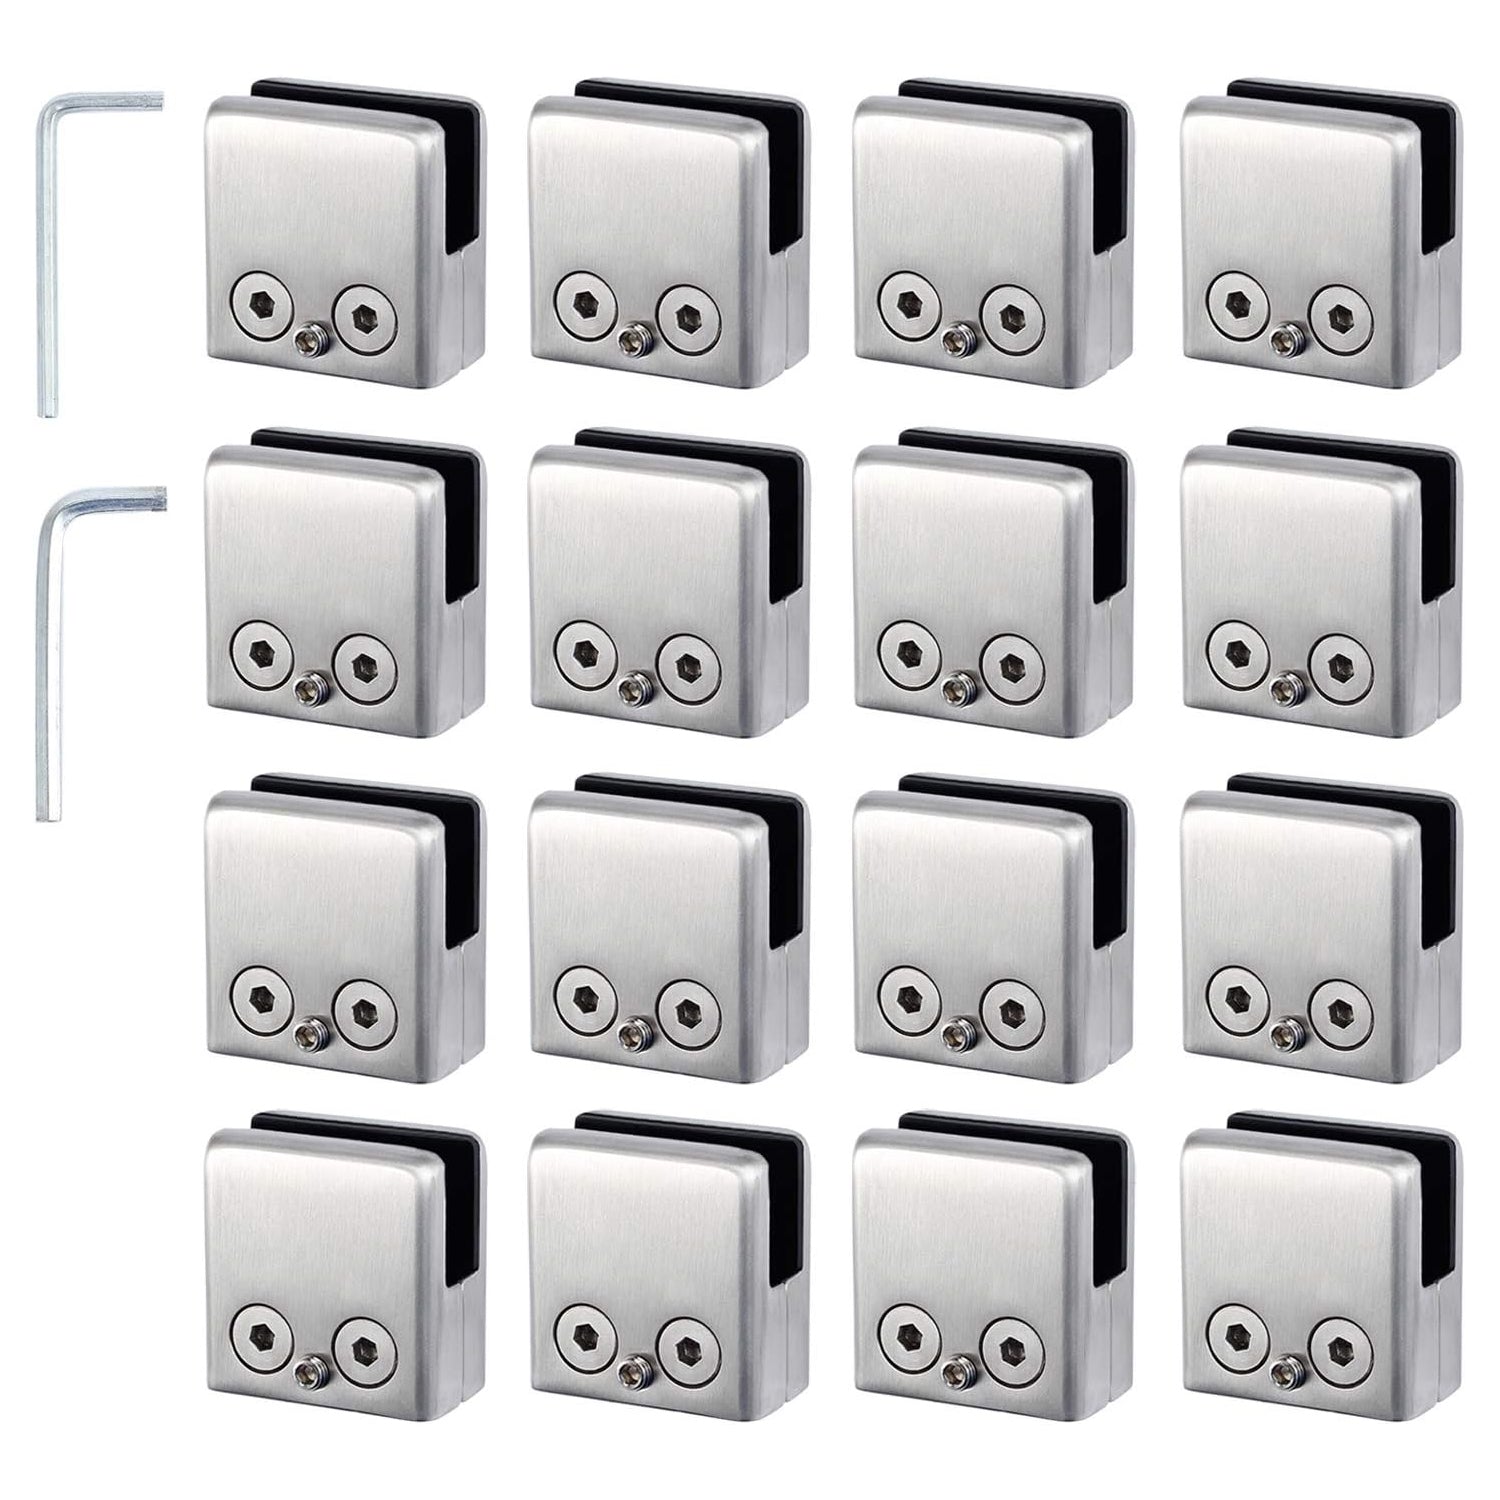 16 PCS 9-10mm Glass Mounting Brackets, Square Glass Clamps